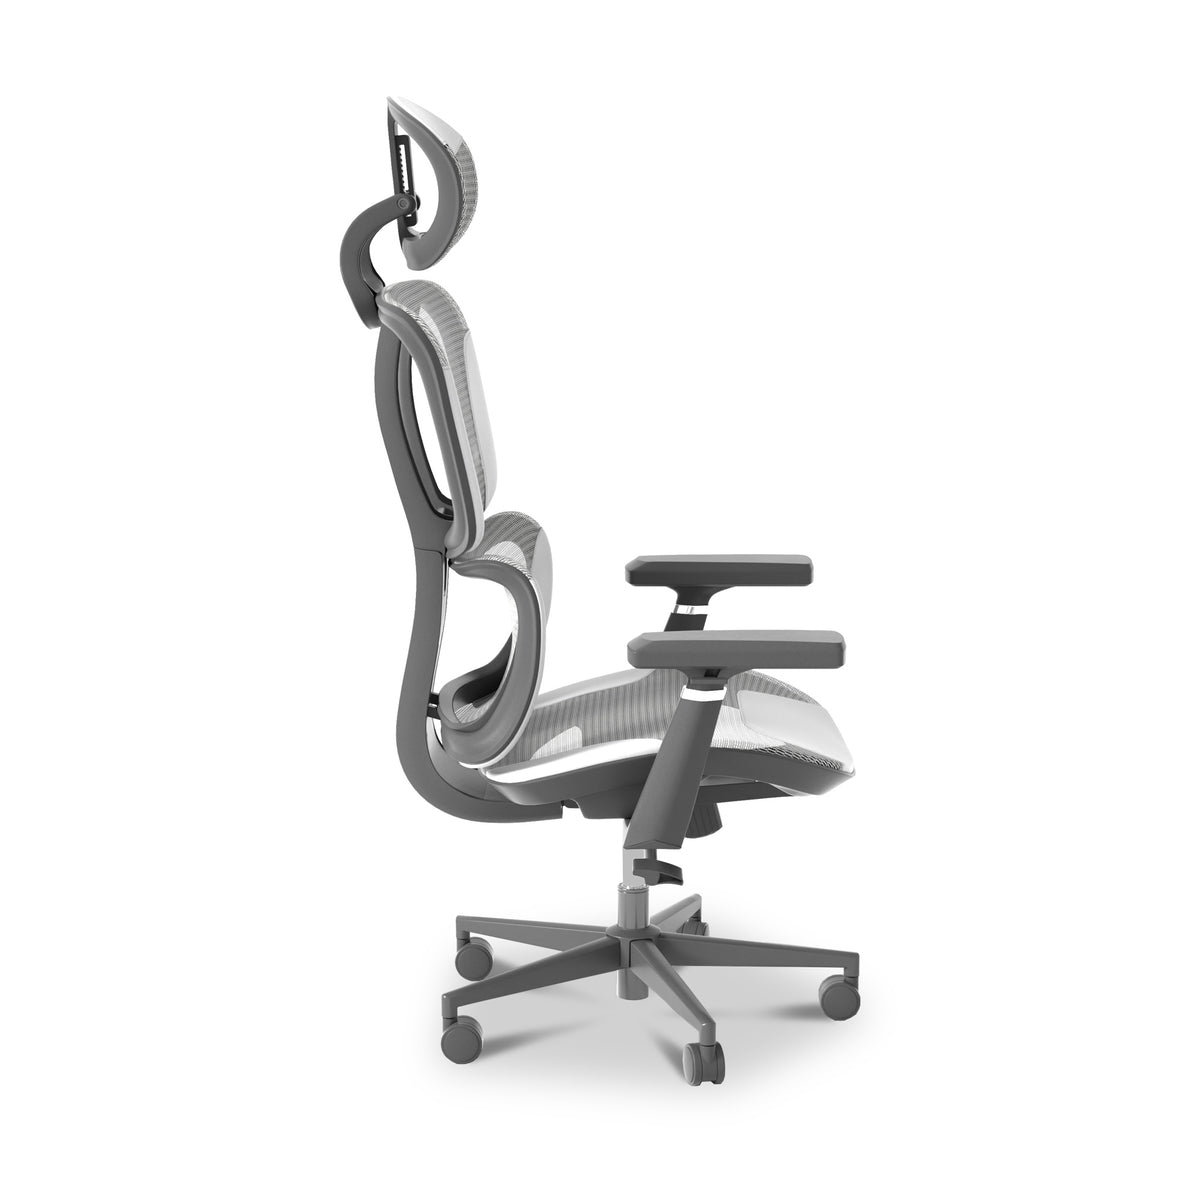 Koble Avalanche Grey Gaming Chair